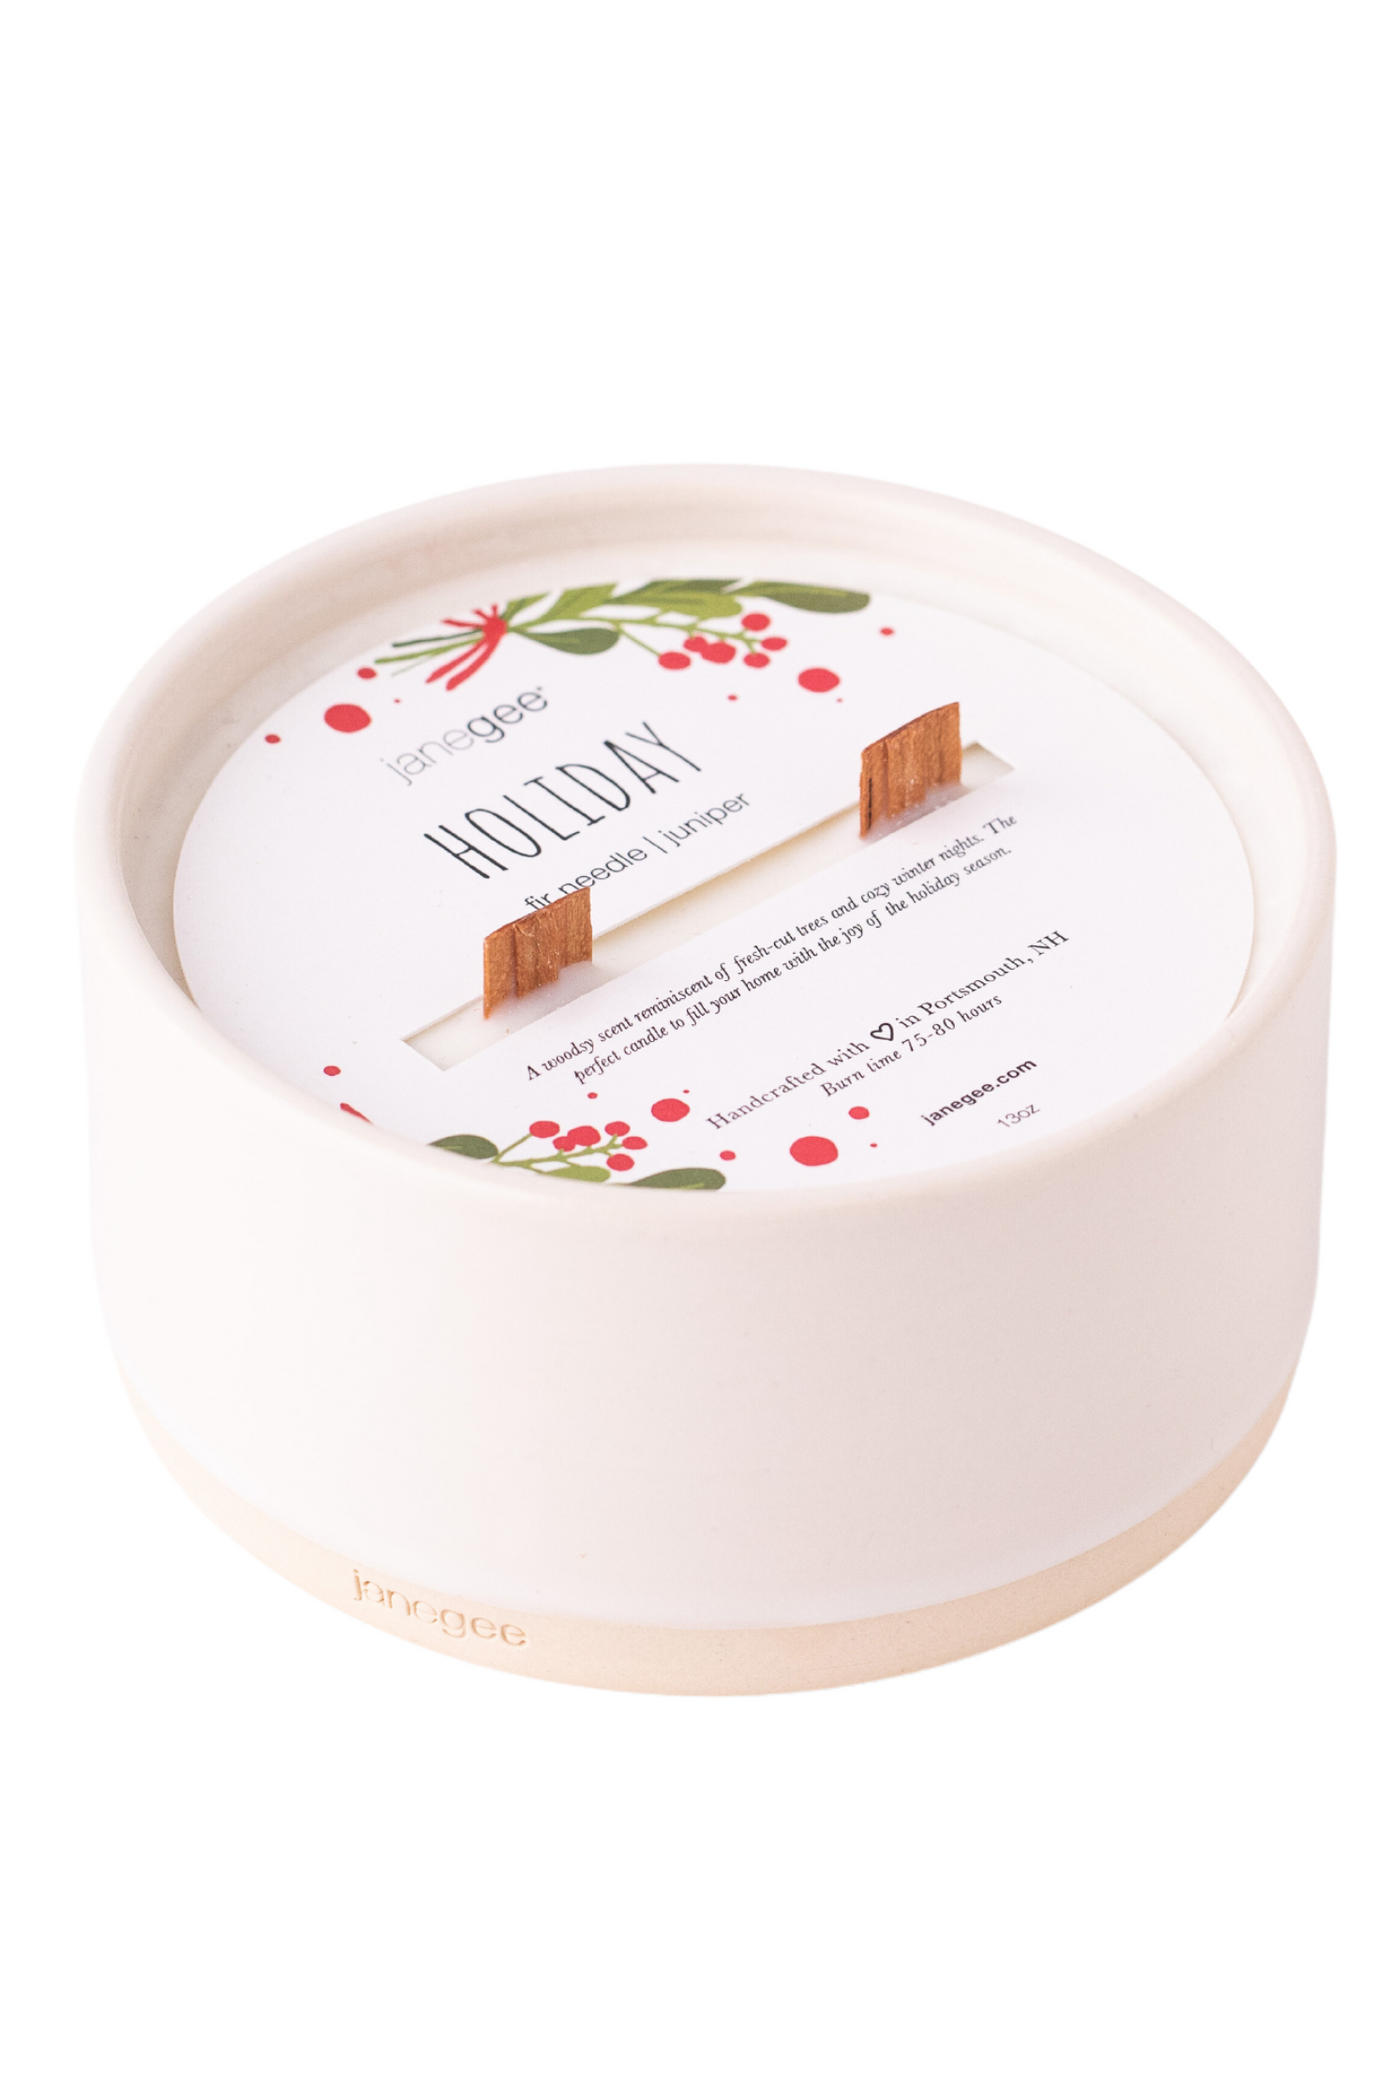 janegee Deluxe Holiday Aromatherapy Candle